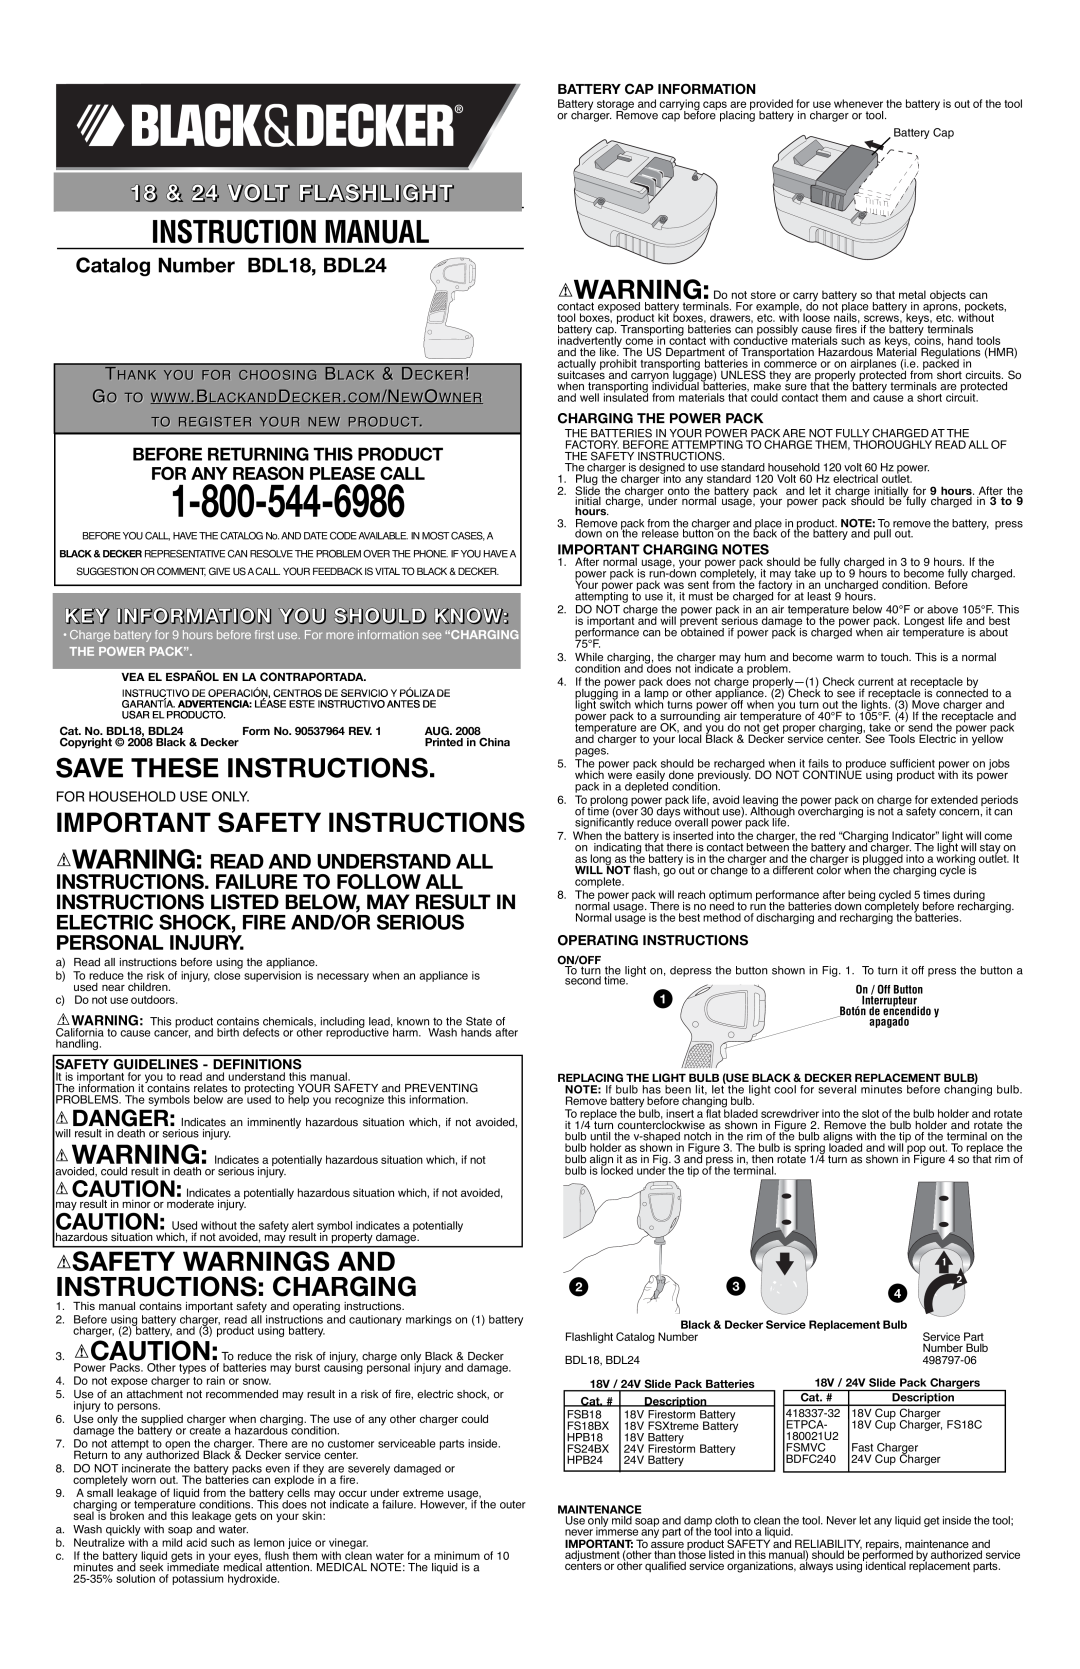 Black & Decker BDL18 important safety instructions Save These Instructions, Safety Warnings And Instructions Charging 